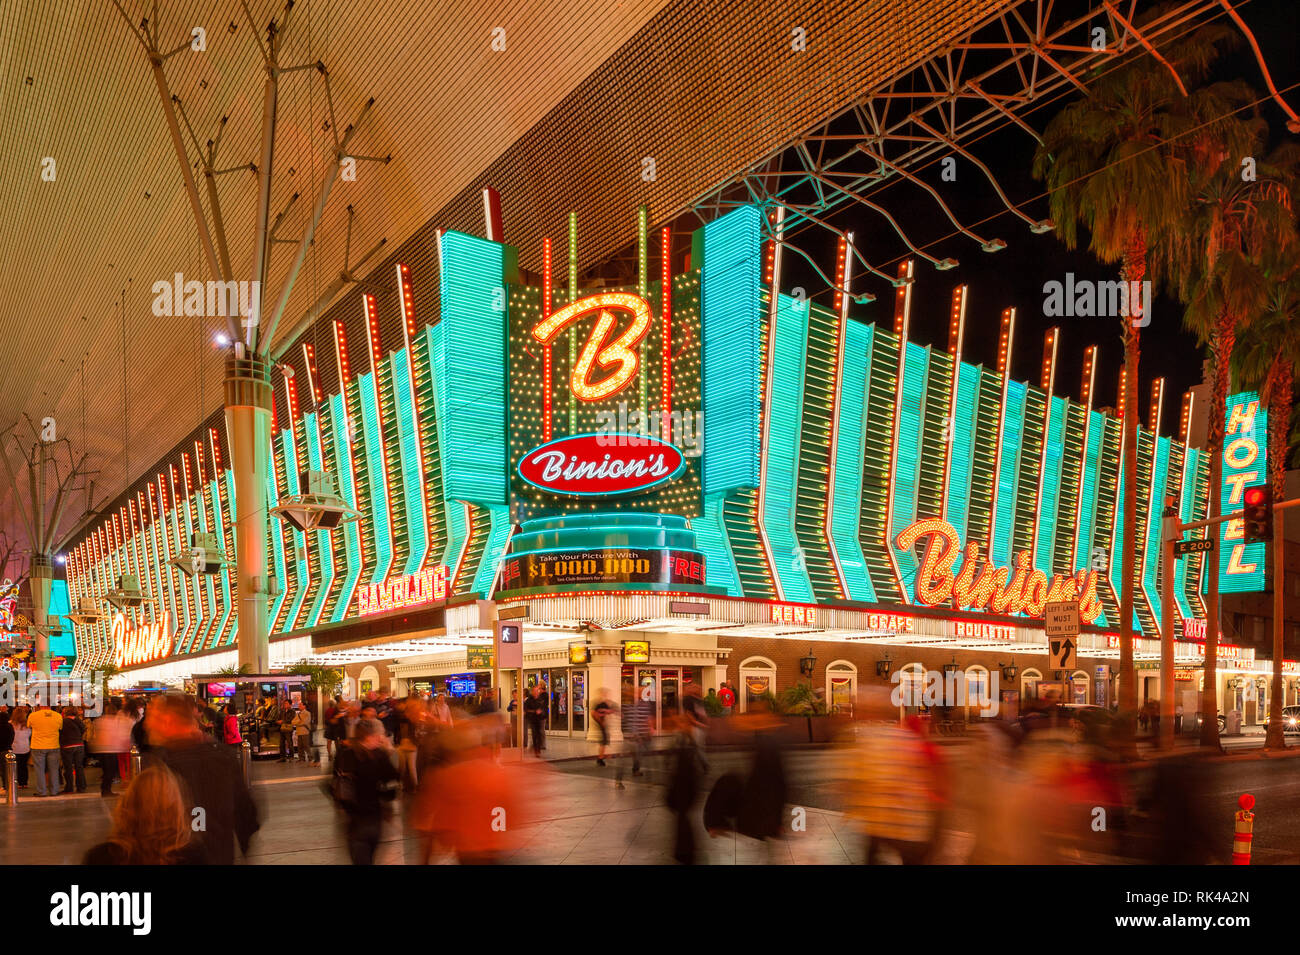 Binion's Gambling Hall at Fremont Street in Las Vegas, Nevada, USA at night. The Casino opened in 1951. Stock Photo